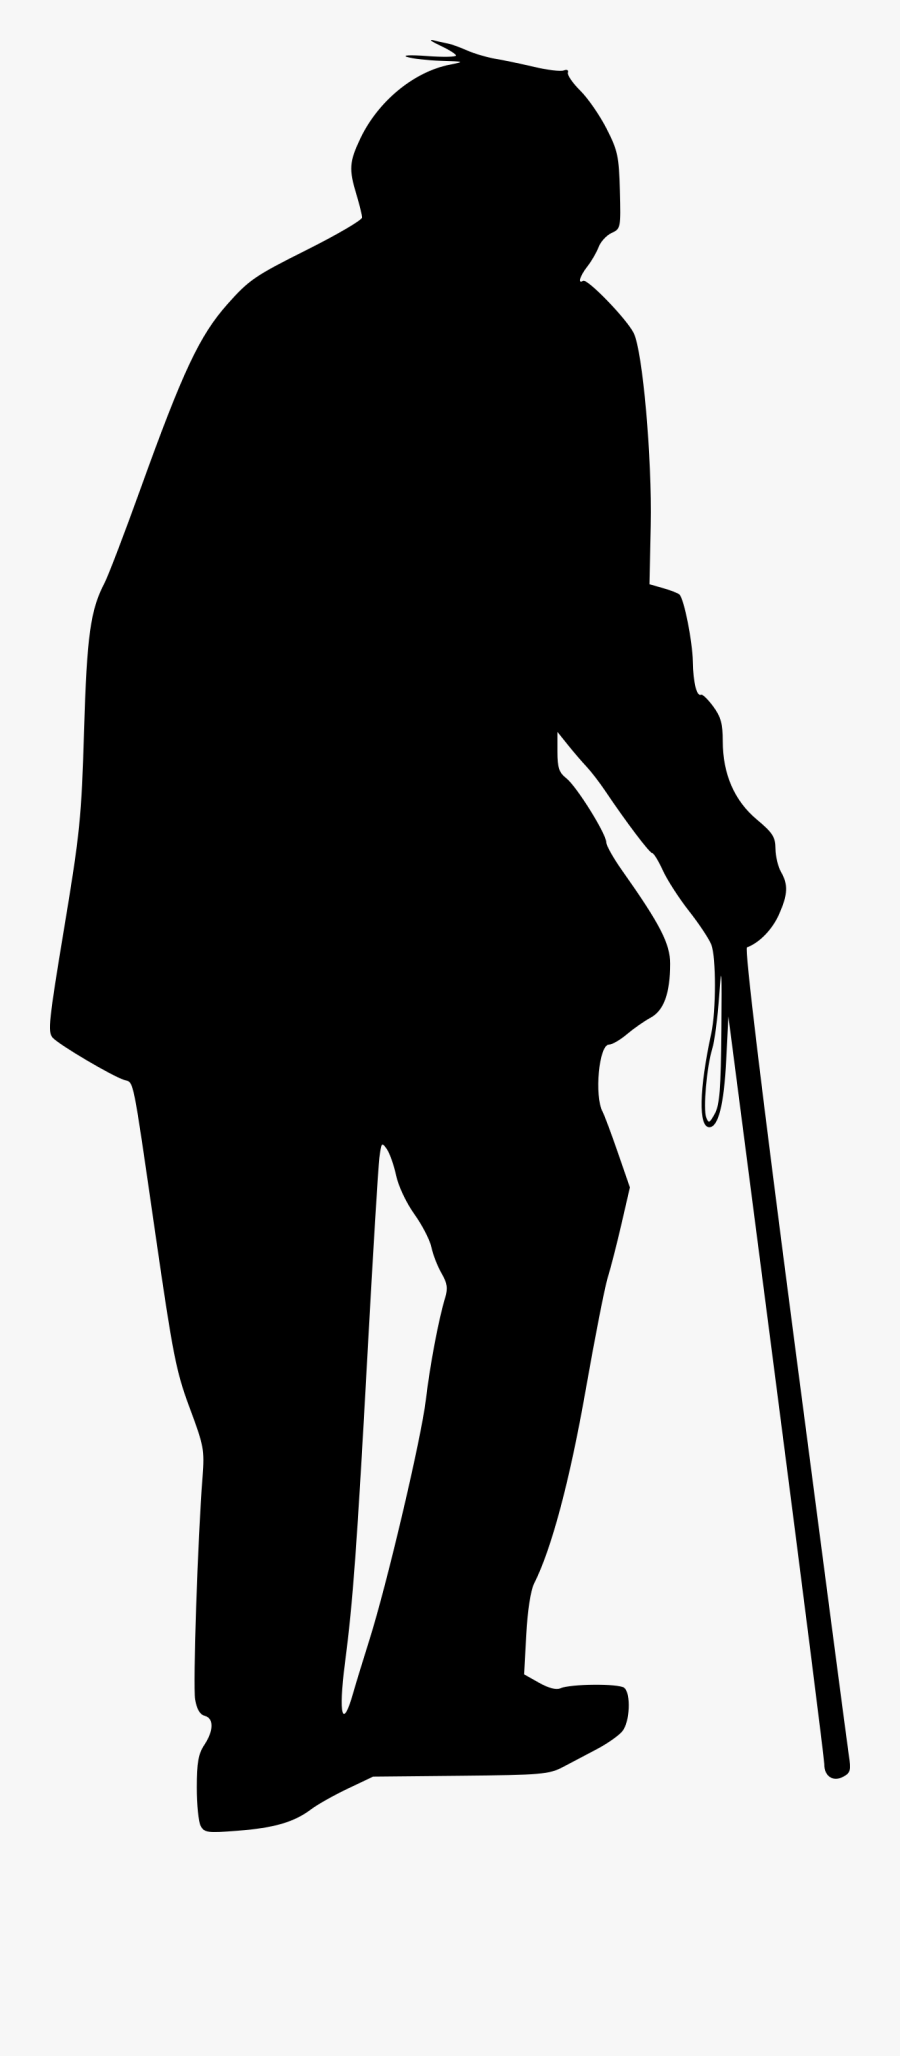 Old Person Silhouette Png, Transparent Clipart